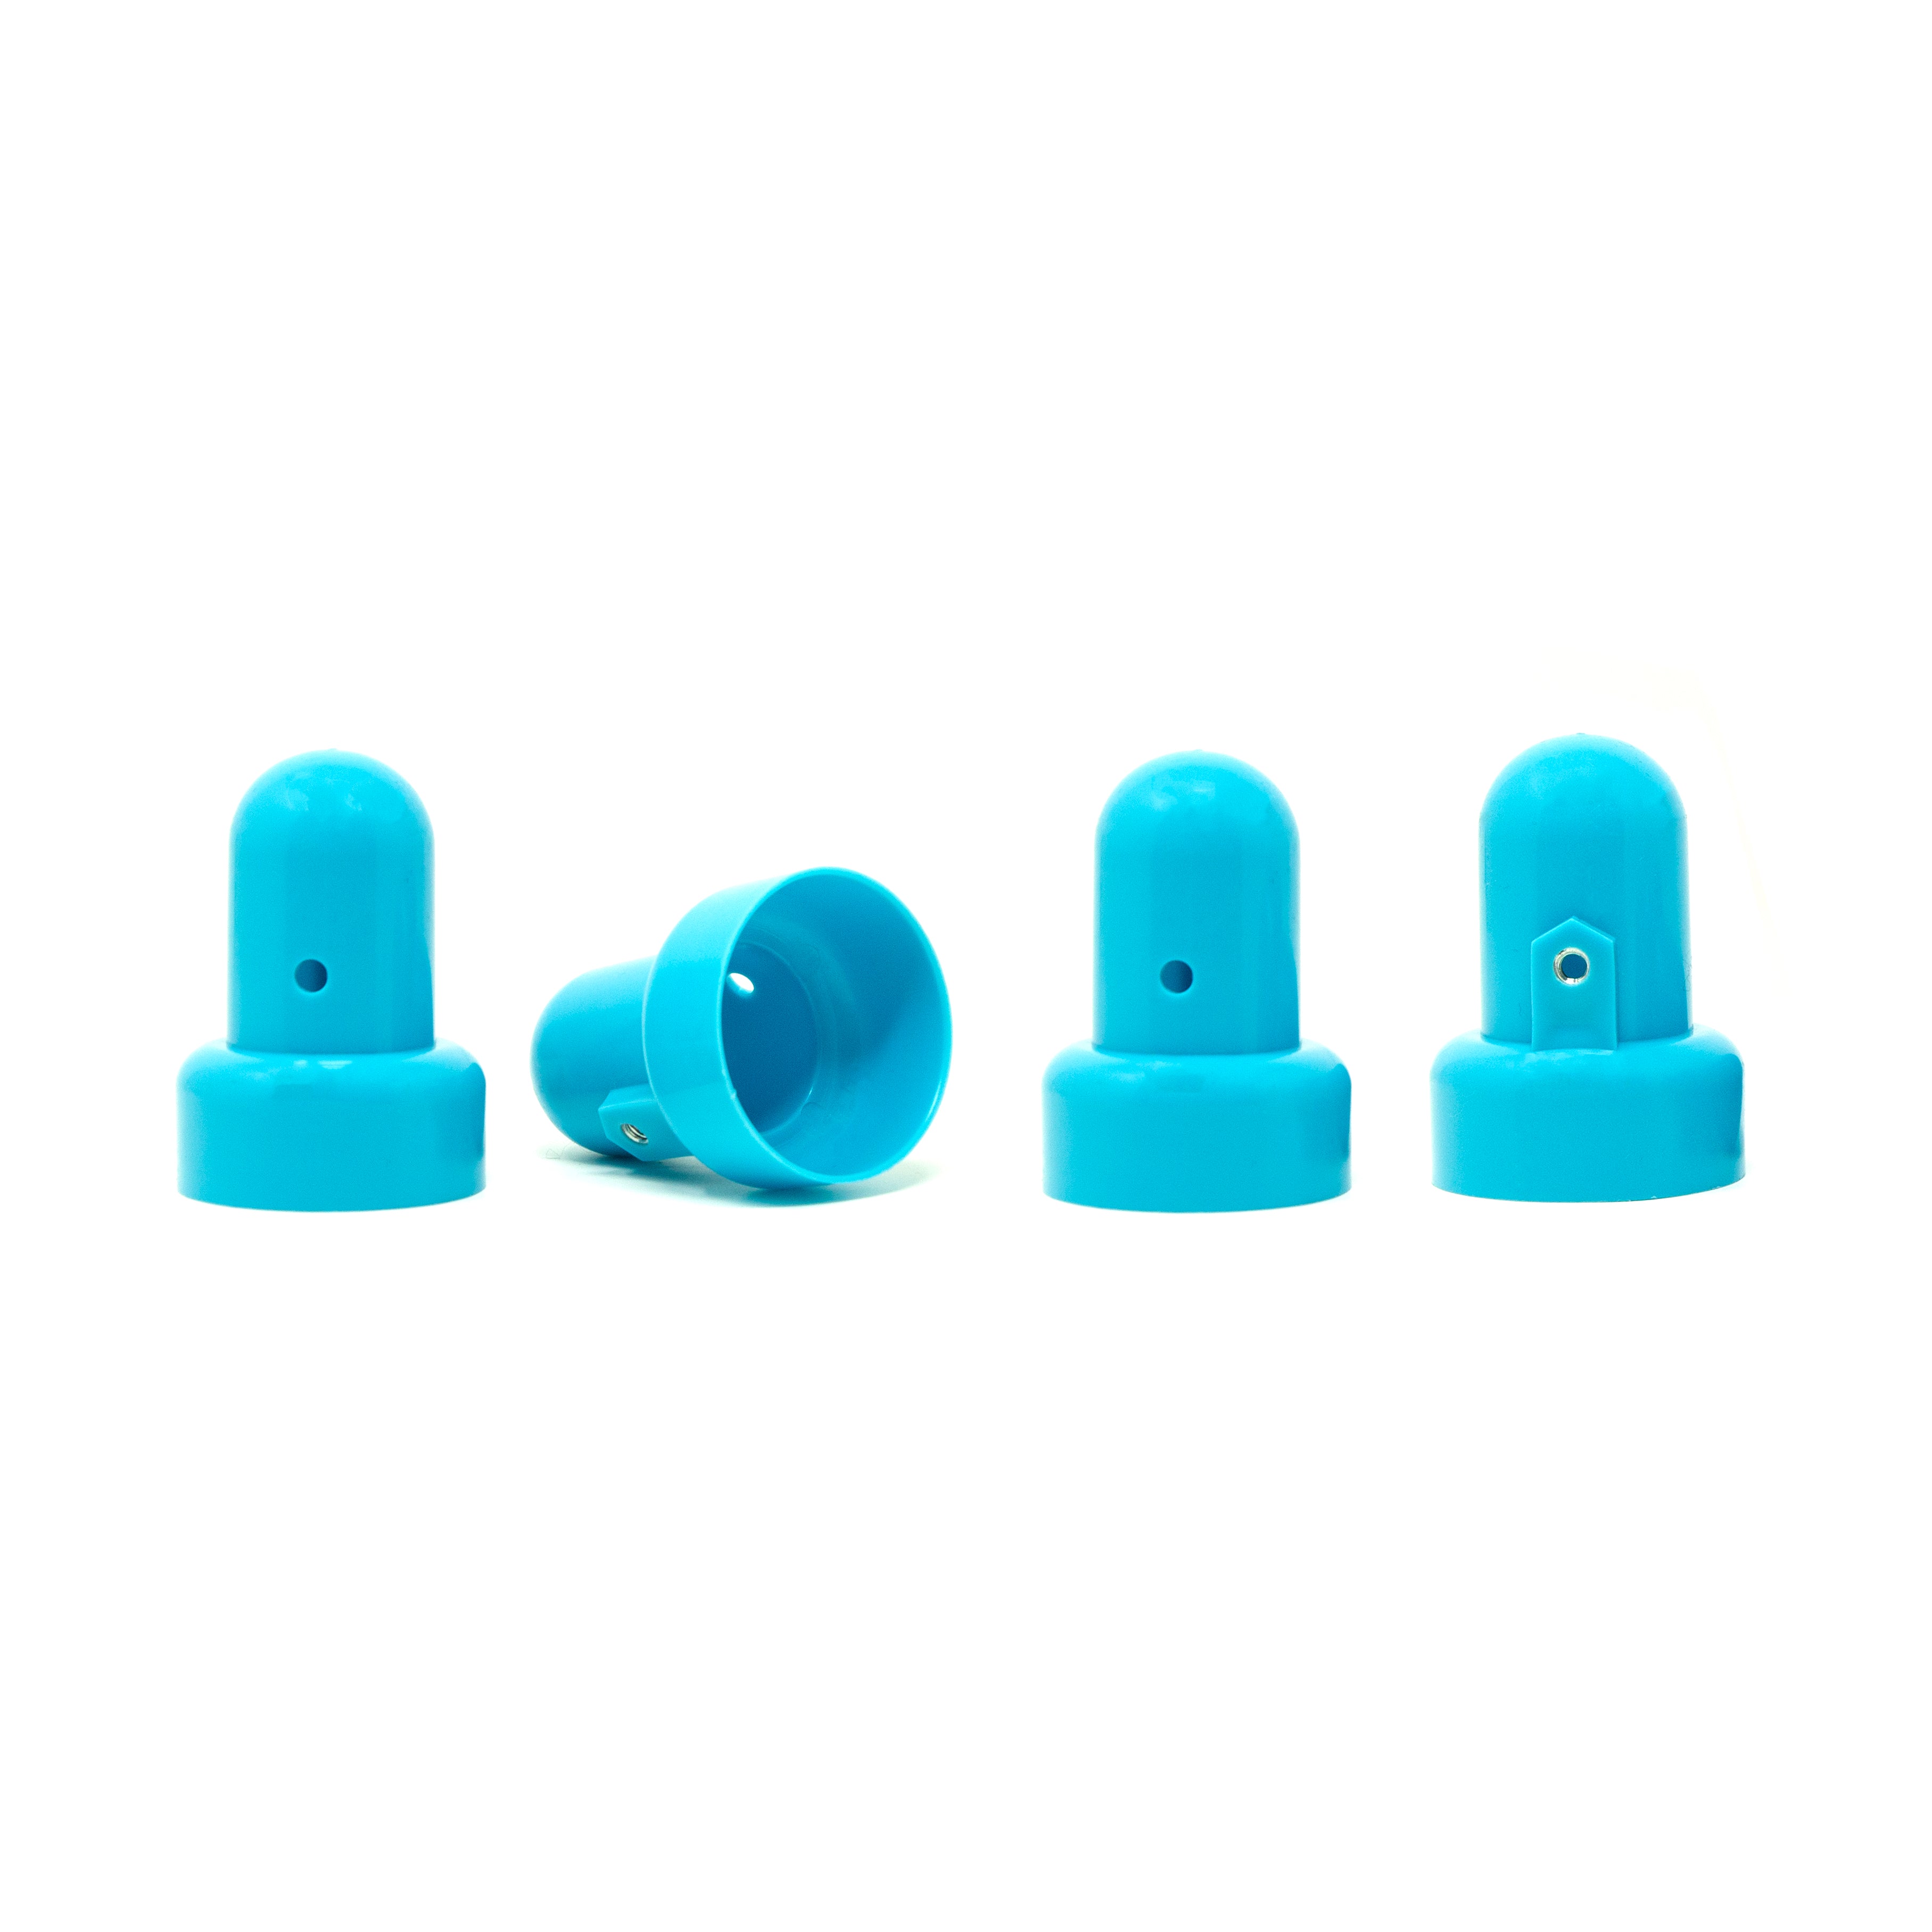 4 small, teal pole caps with one lying on its side. 